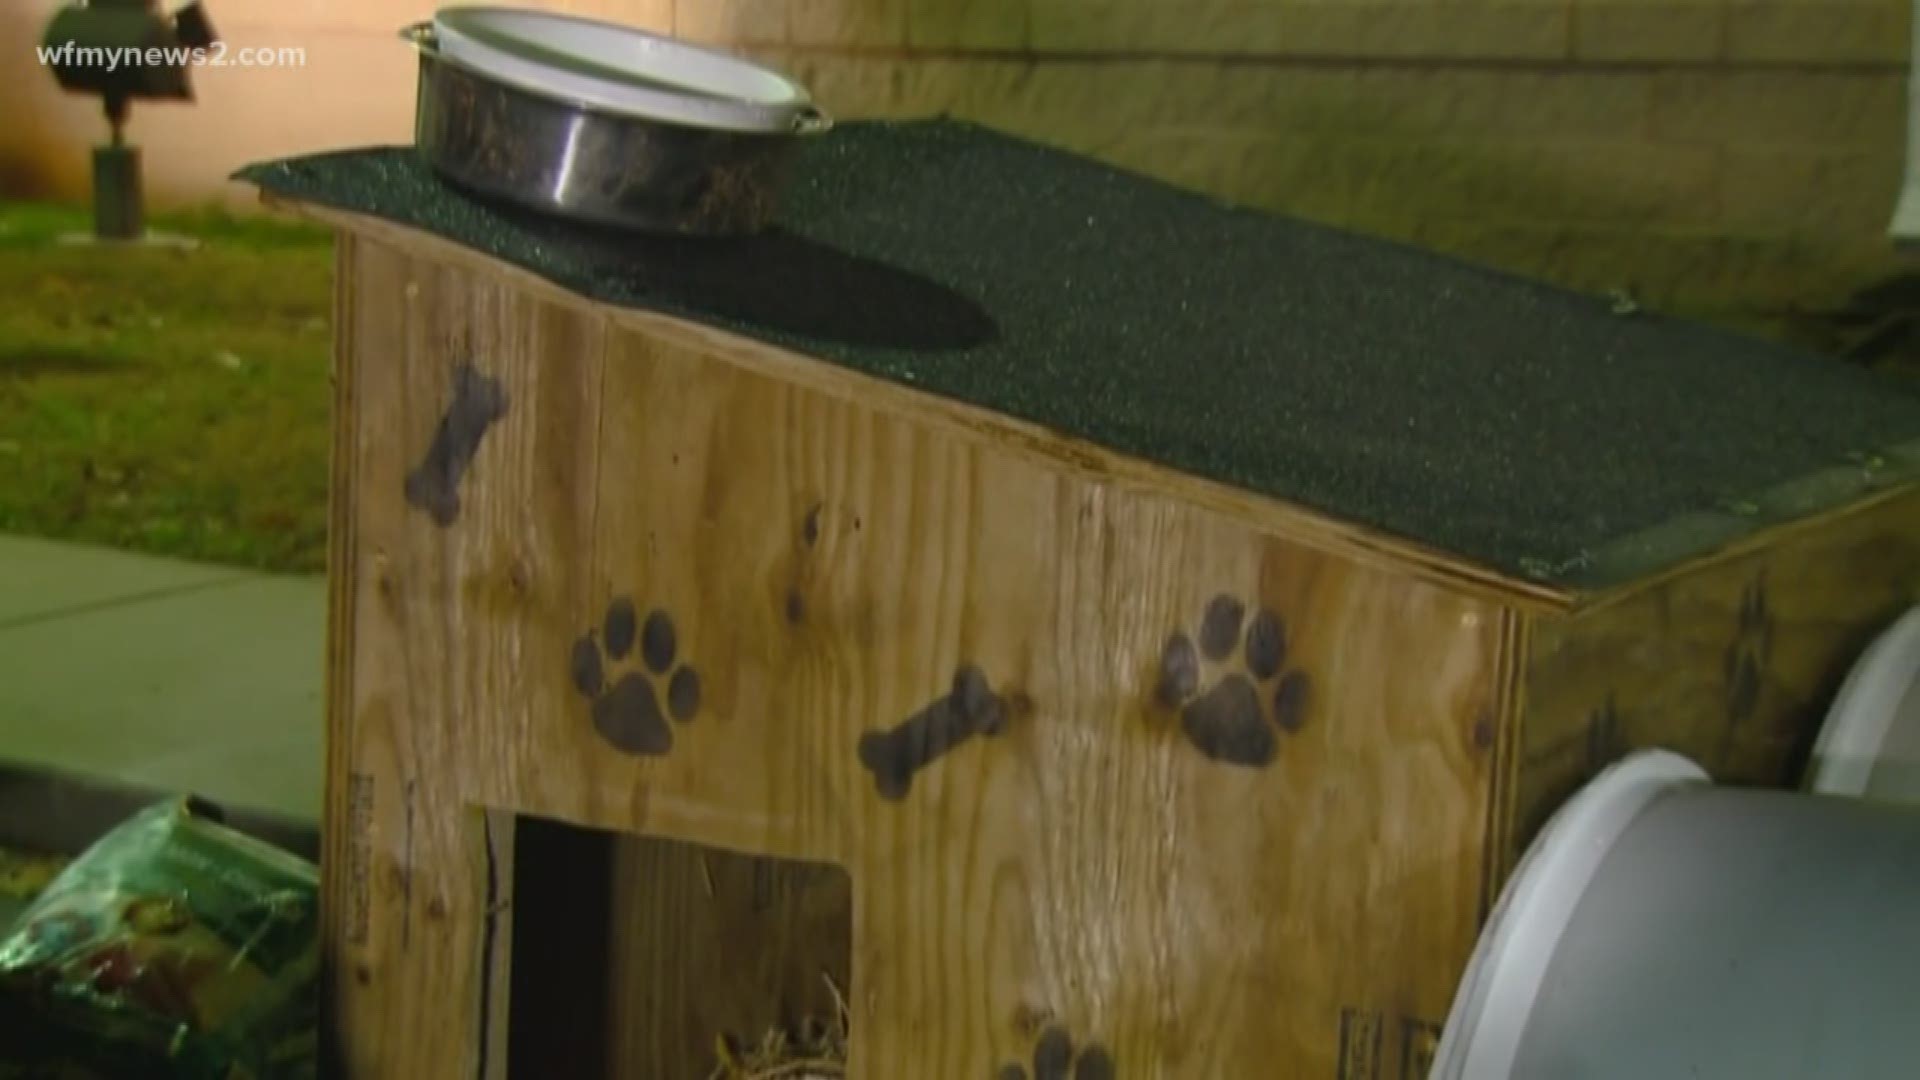 Every dog deserves a warm house during the winter. Unchain Winston is giving away houses to Forsyth County pet owners and you can help.